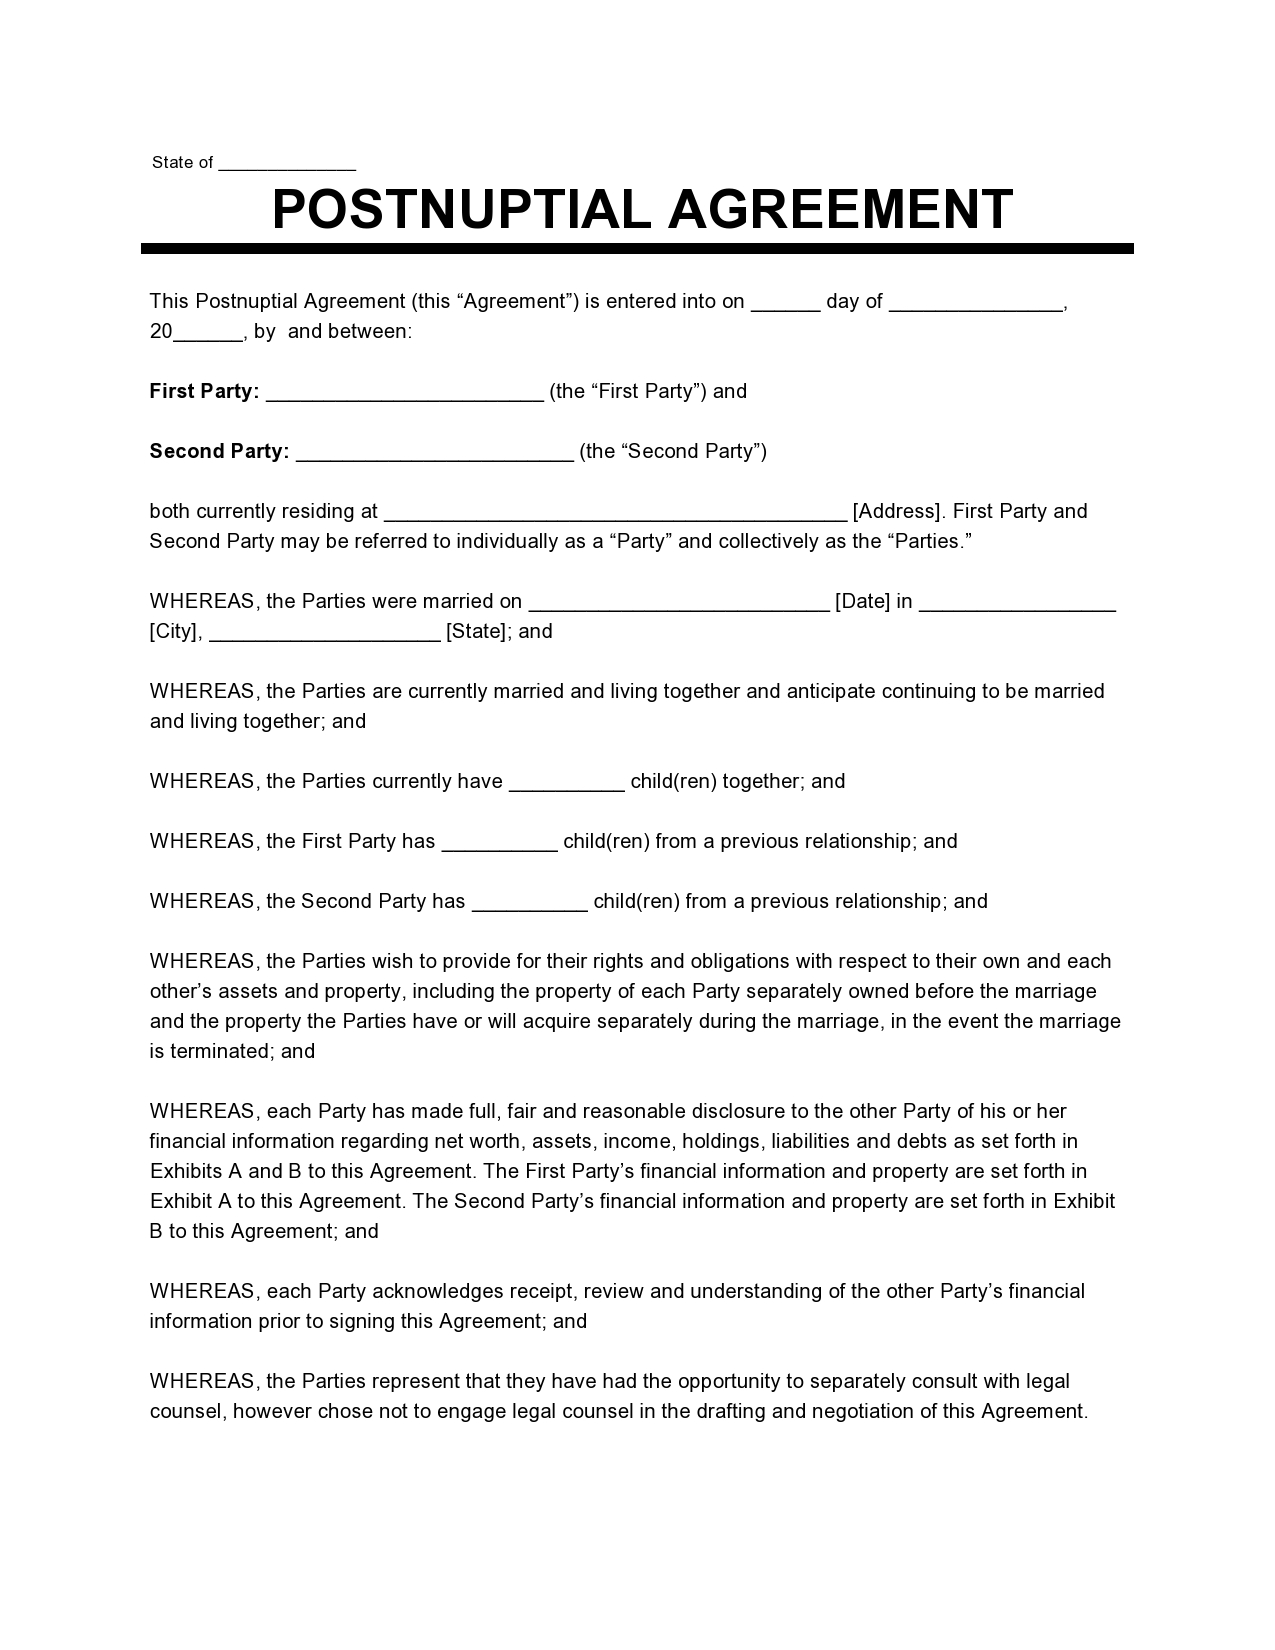 Free postnuptial agreement template 02